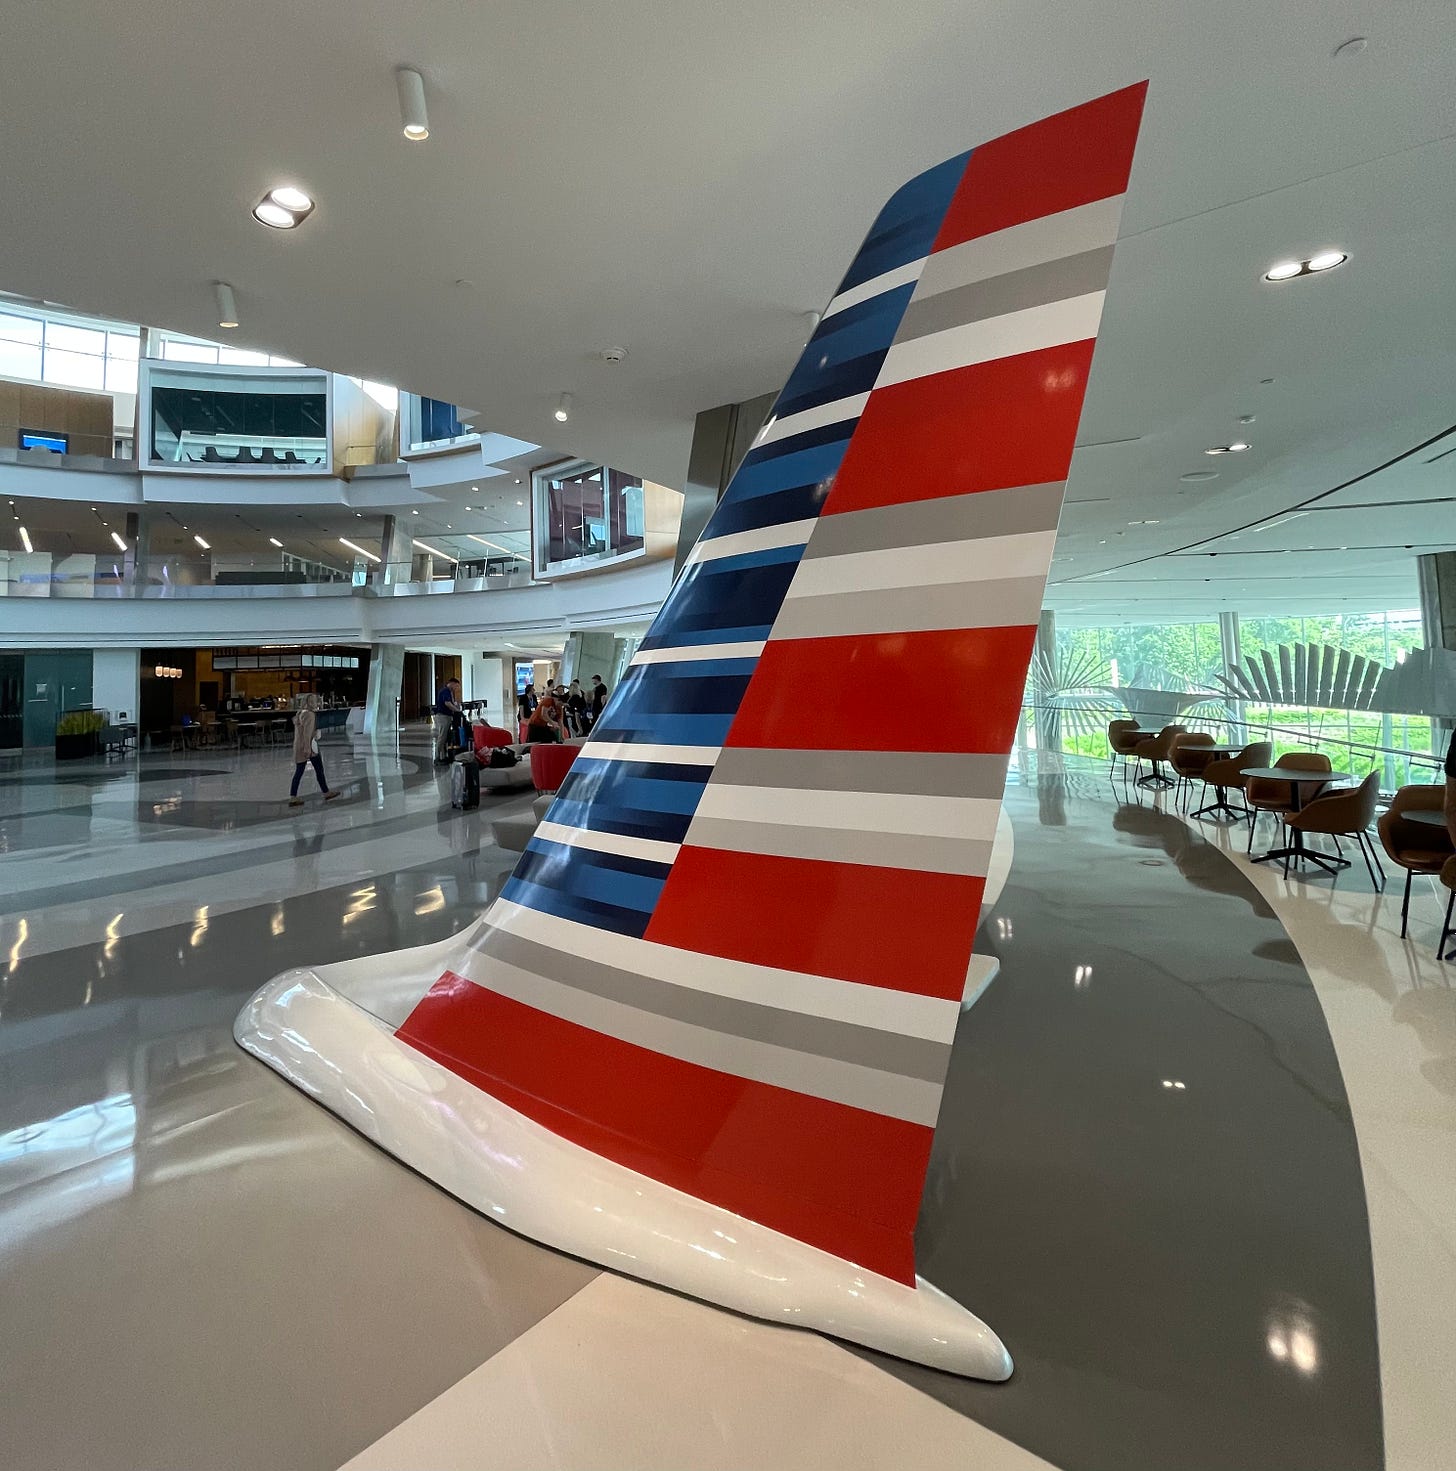 AA tail sculpture in the Skyview 8 building at the new American Airlines headquarters campus near DFW airport